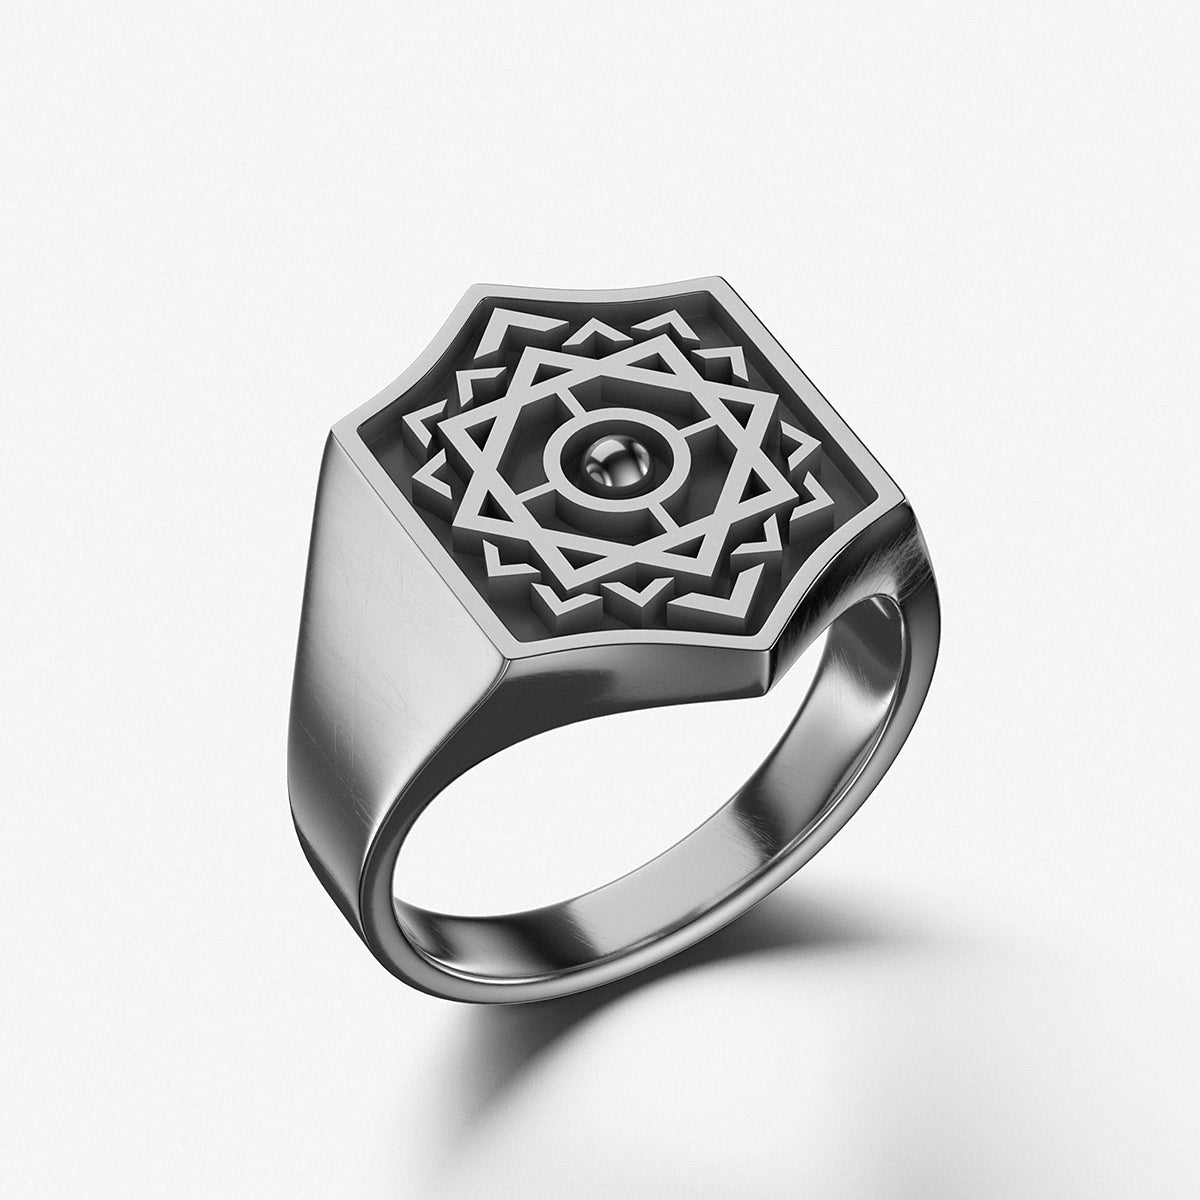 Signet Ring "The Maze" / 925 Sterling Silver